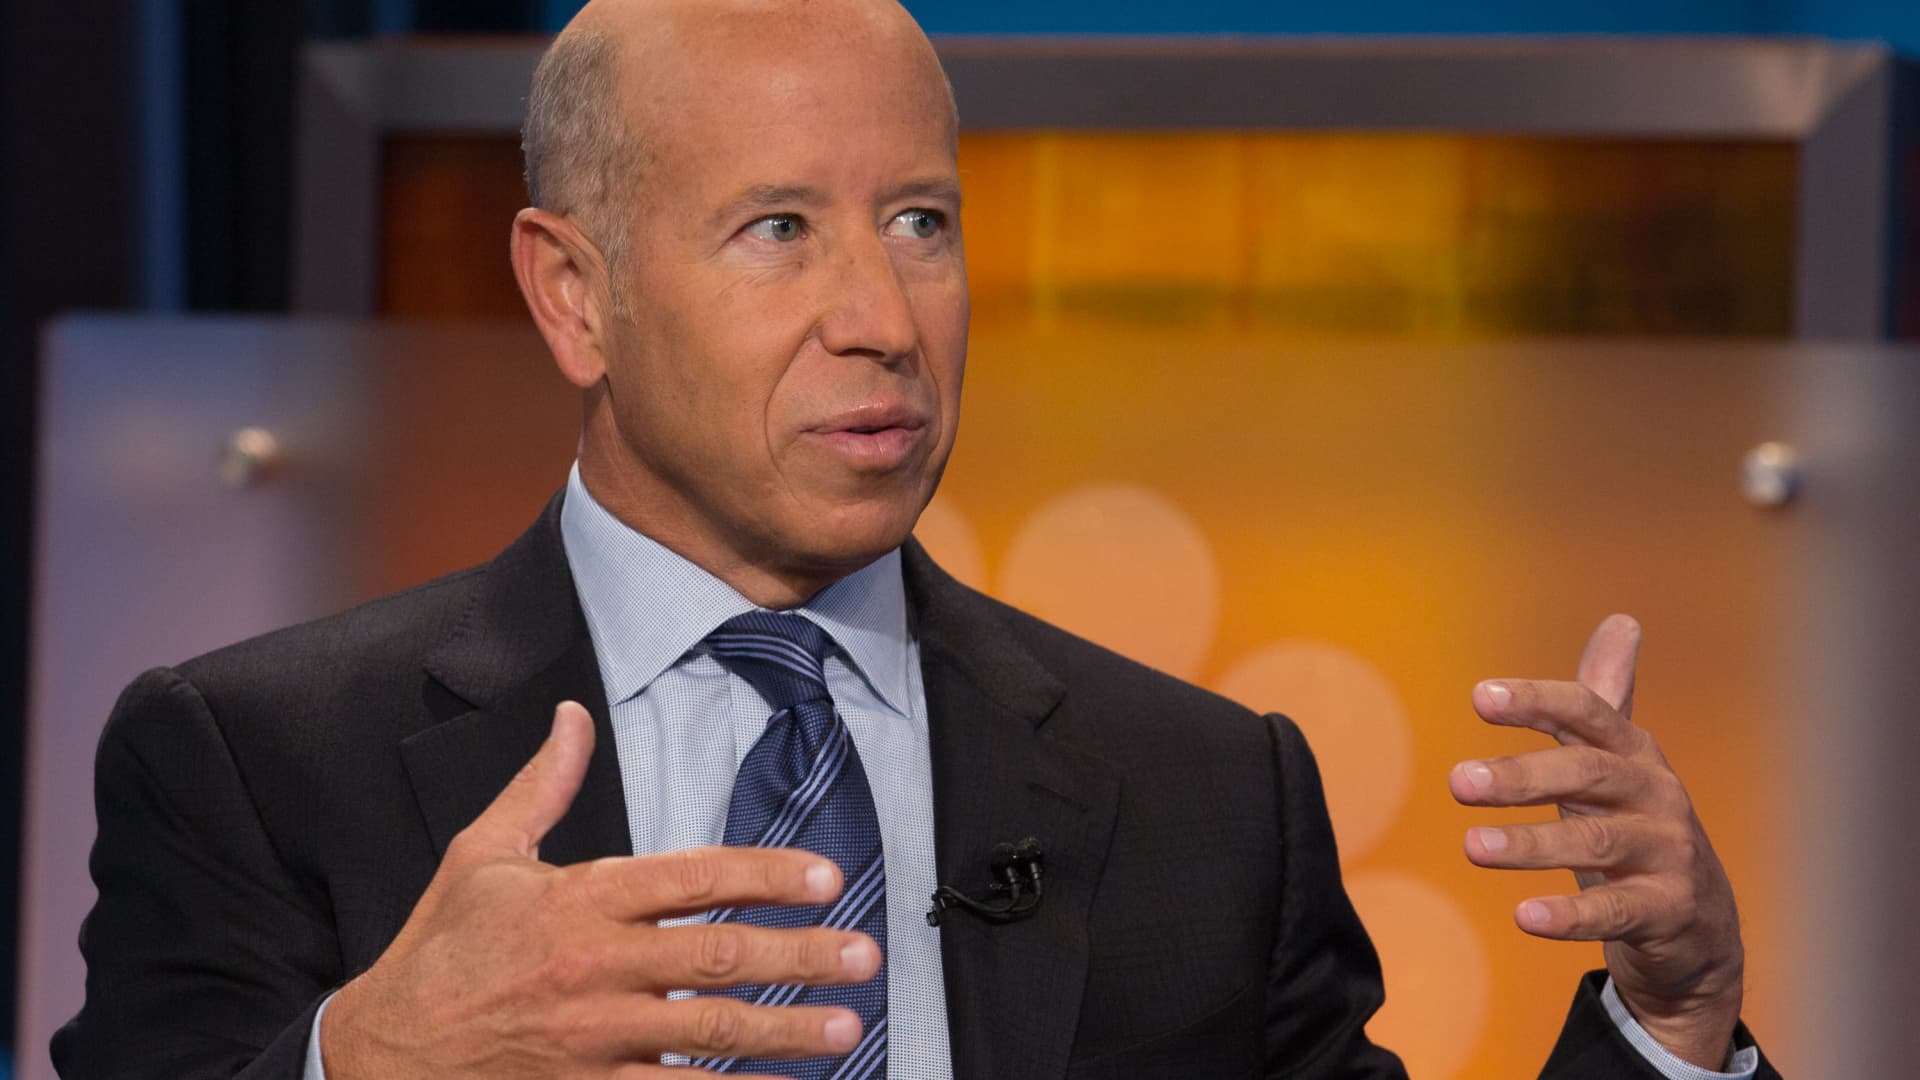 Fed policymakers will see 'they blew it' with interest rate hikes, predicts Starwood Capital's Barry Sternlicht